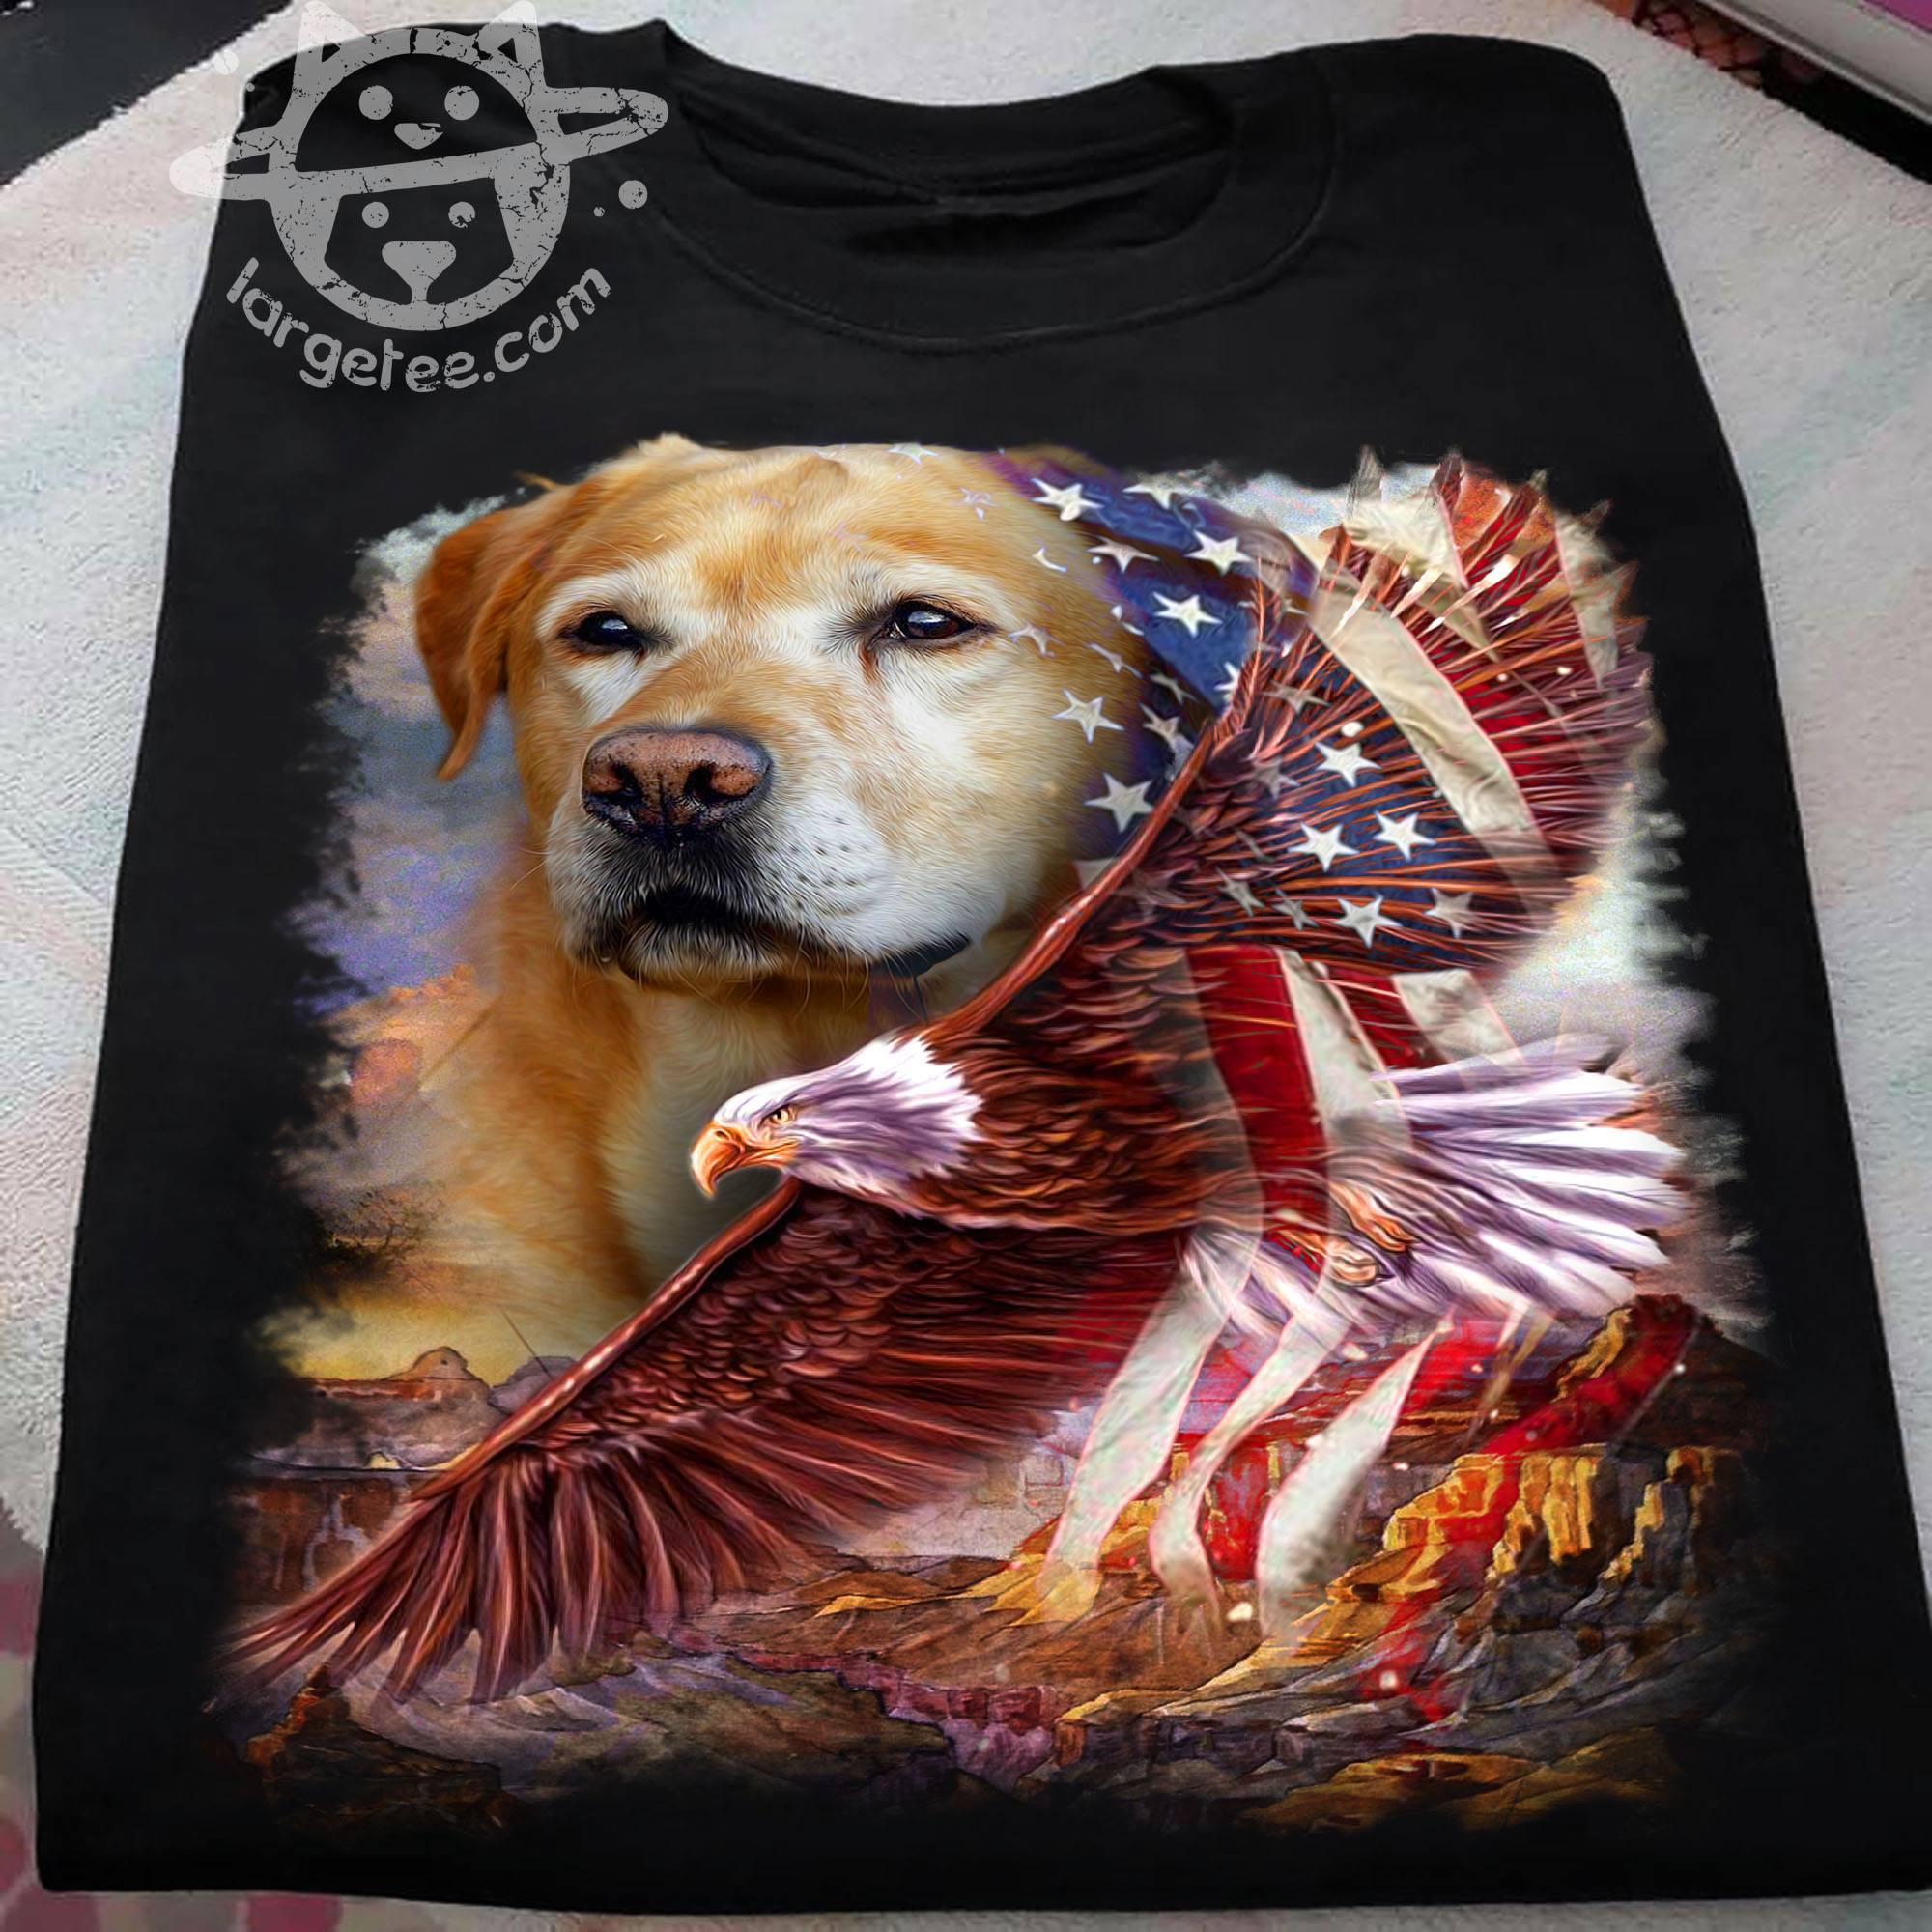 Eagle And Beagle Dog, America Flag – Dog lover, eagle lover, Independence Day, 4th of july